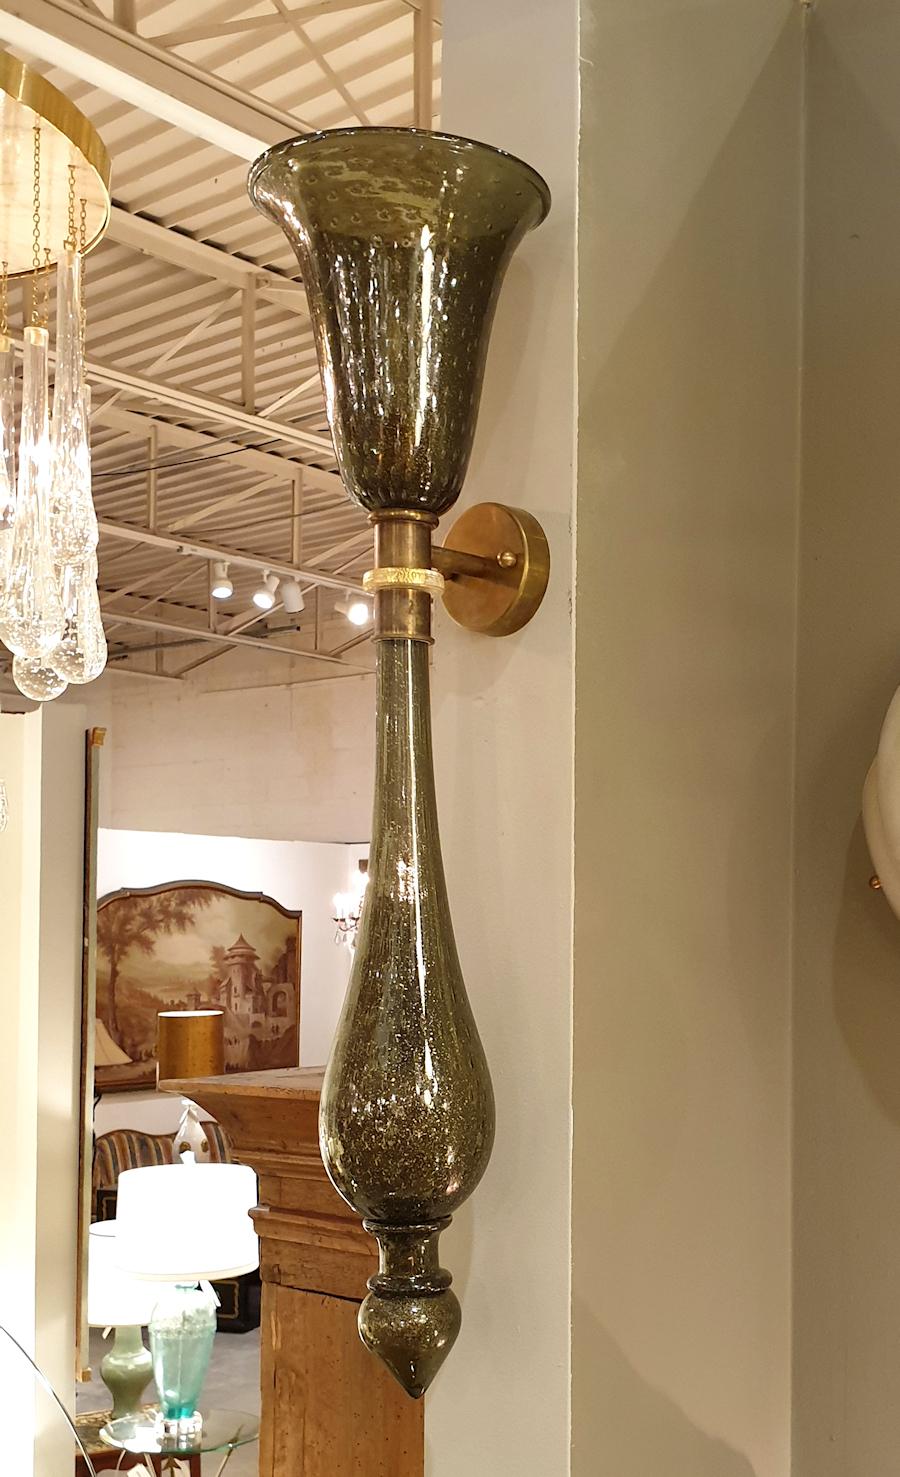 Pair of large torchère wall sconces, in hand blown gray Murano glass, with brass fittings.
They have 1 light each, and have been rewired.
Bullicante decor of the glass: air bubbles circled by gold leaf, inside the glass.
Some gold flakes give a